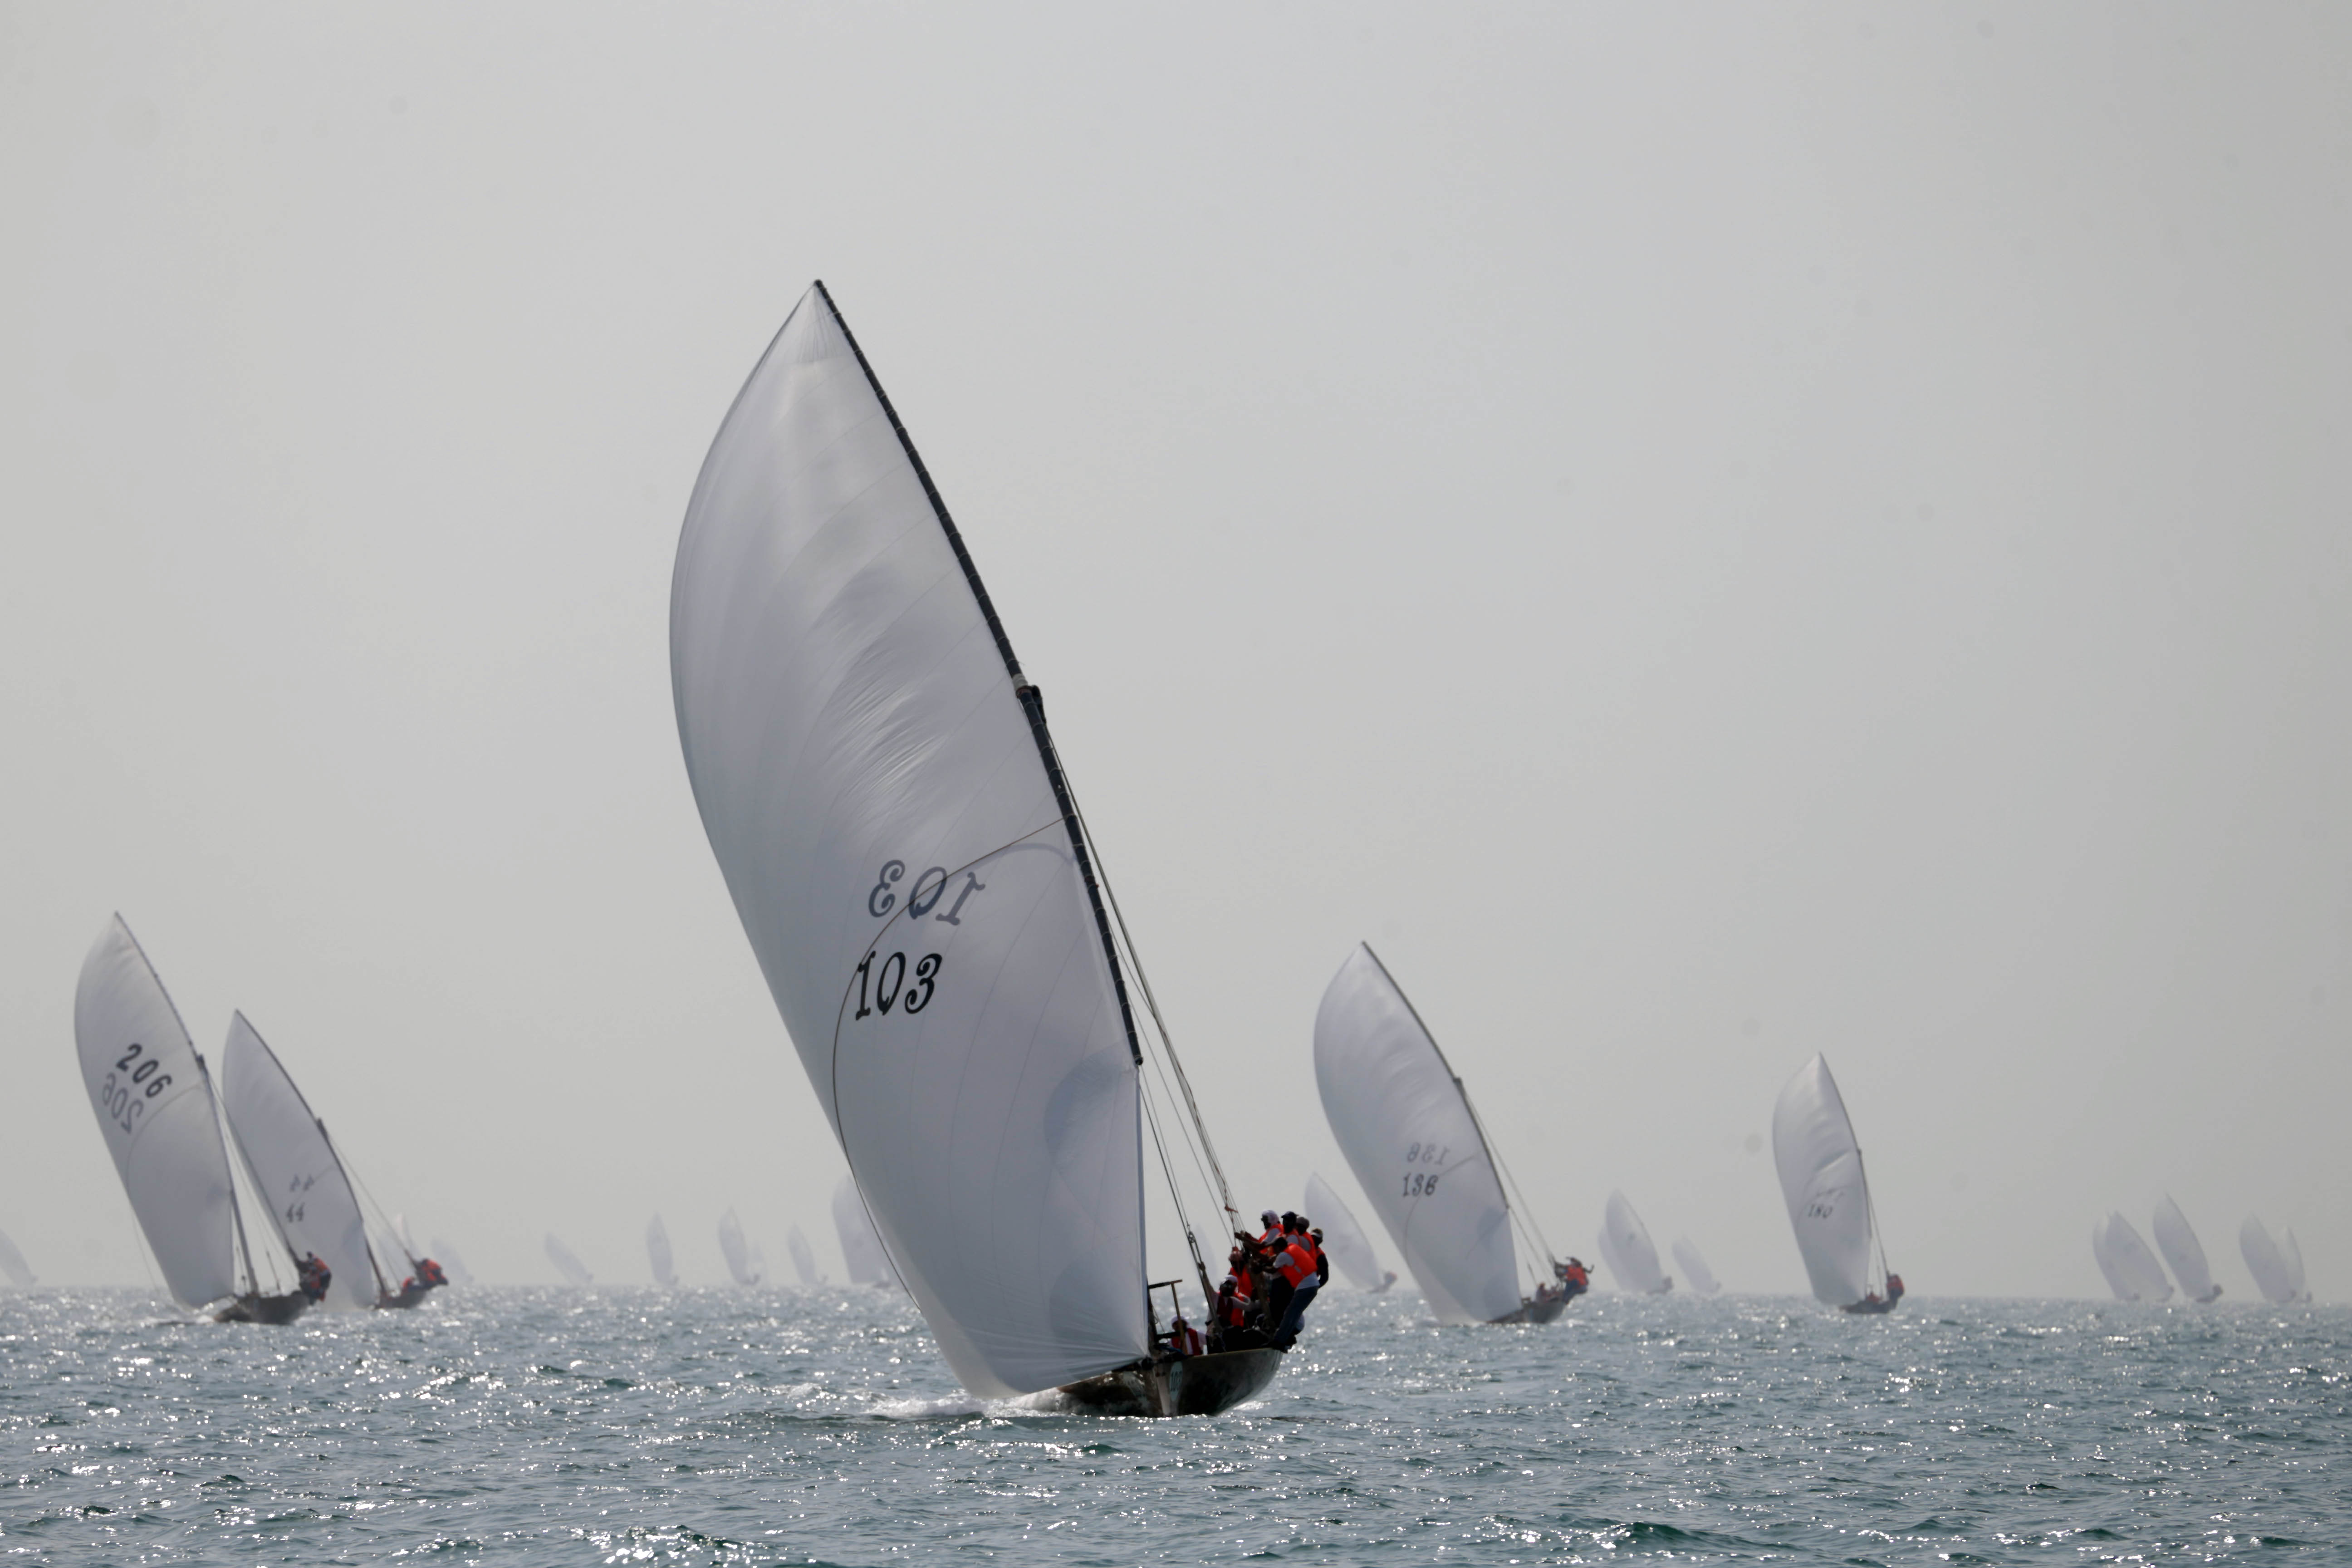 43ft Dubai Traditional Dhow Sailing Race today